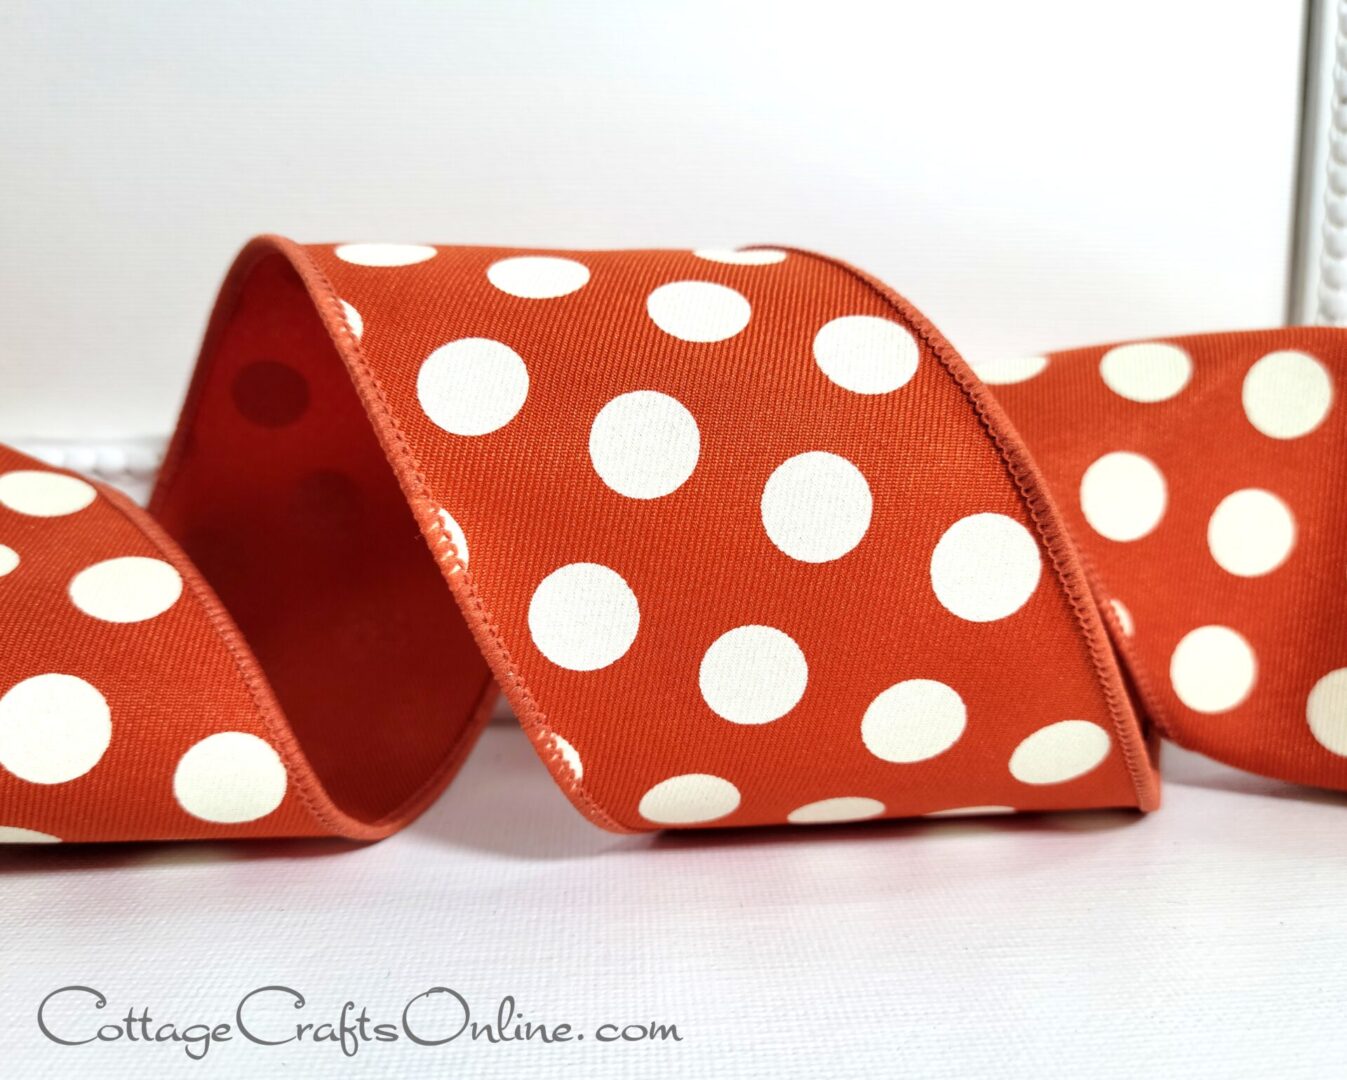 A red and white polka dot ribbon is sitting on the table.